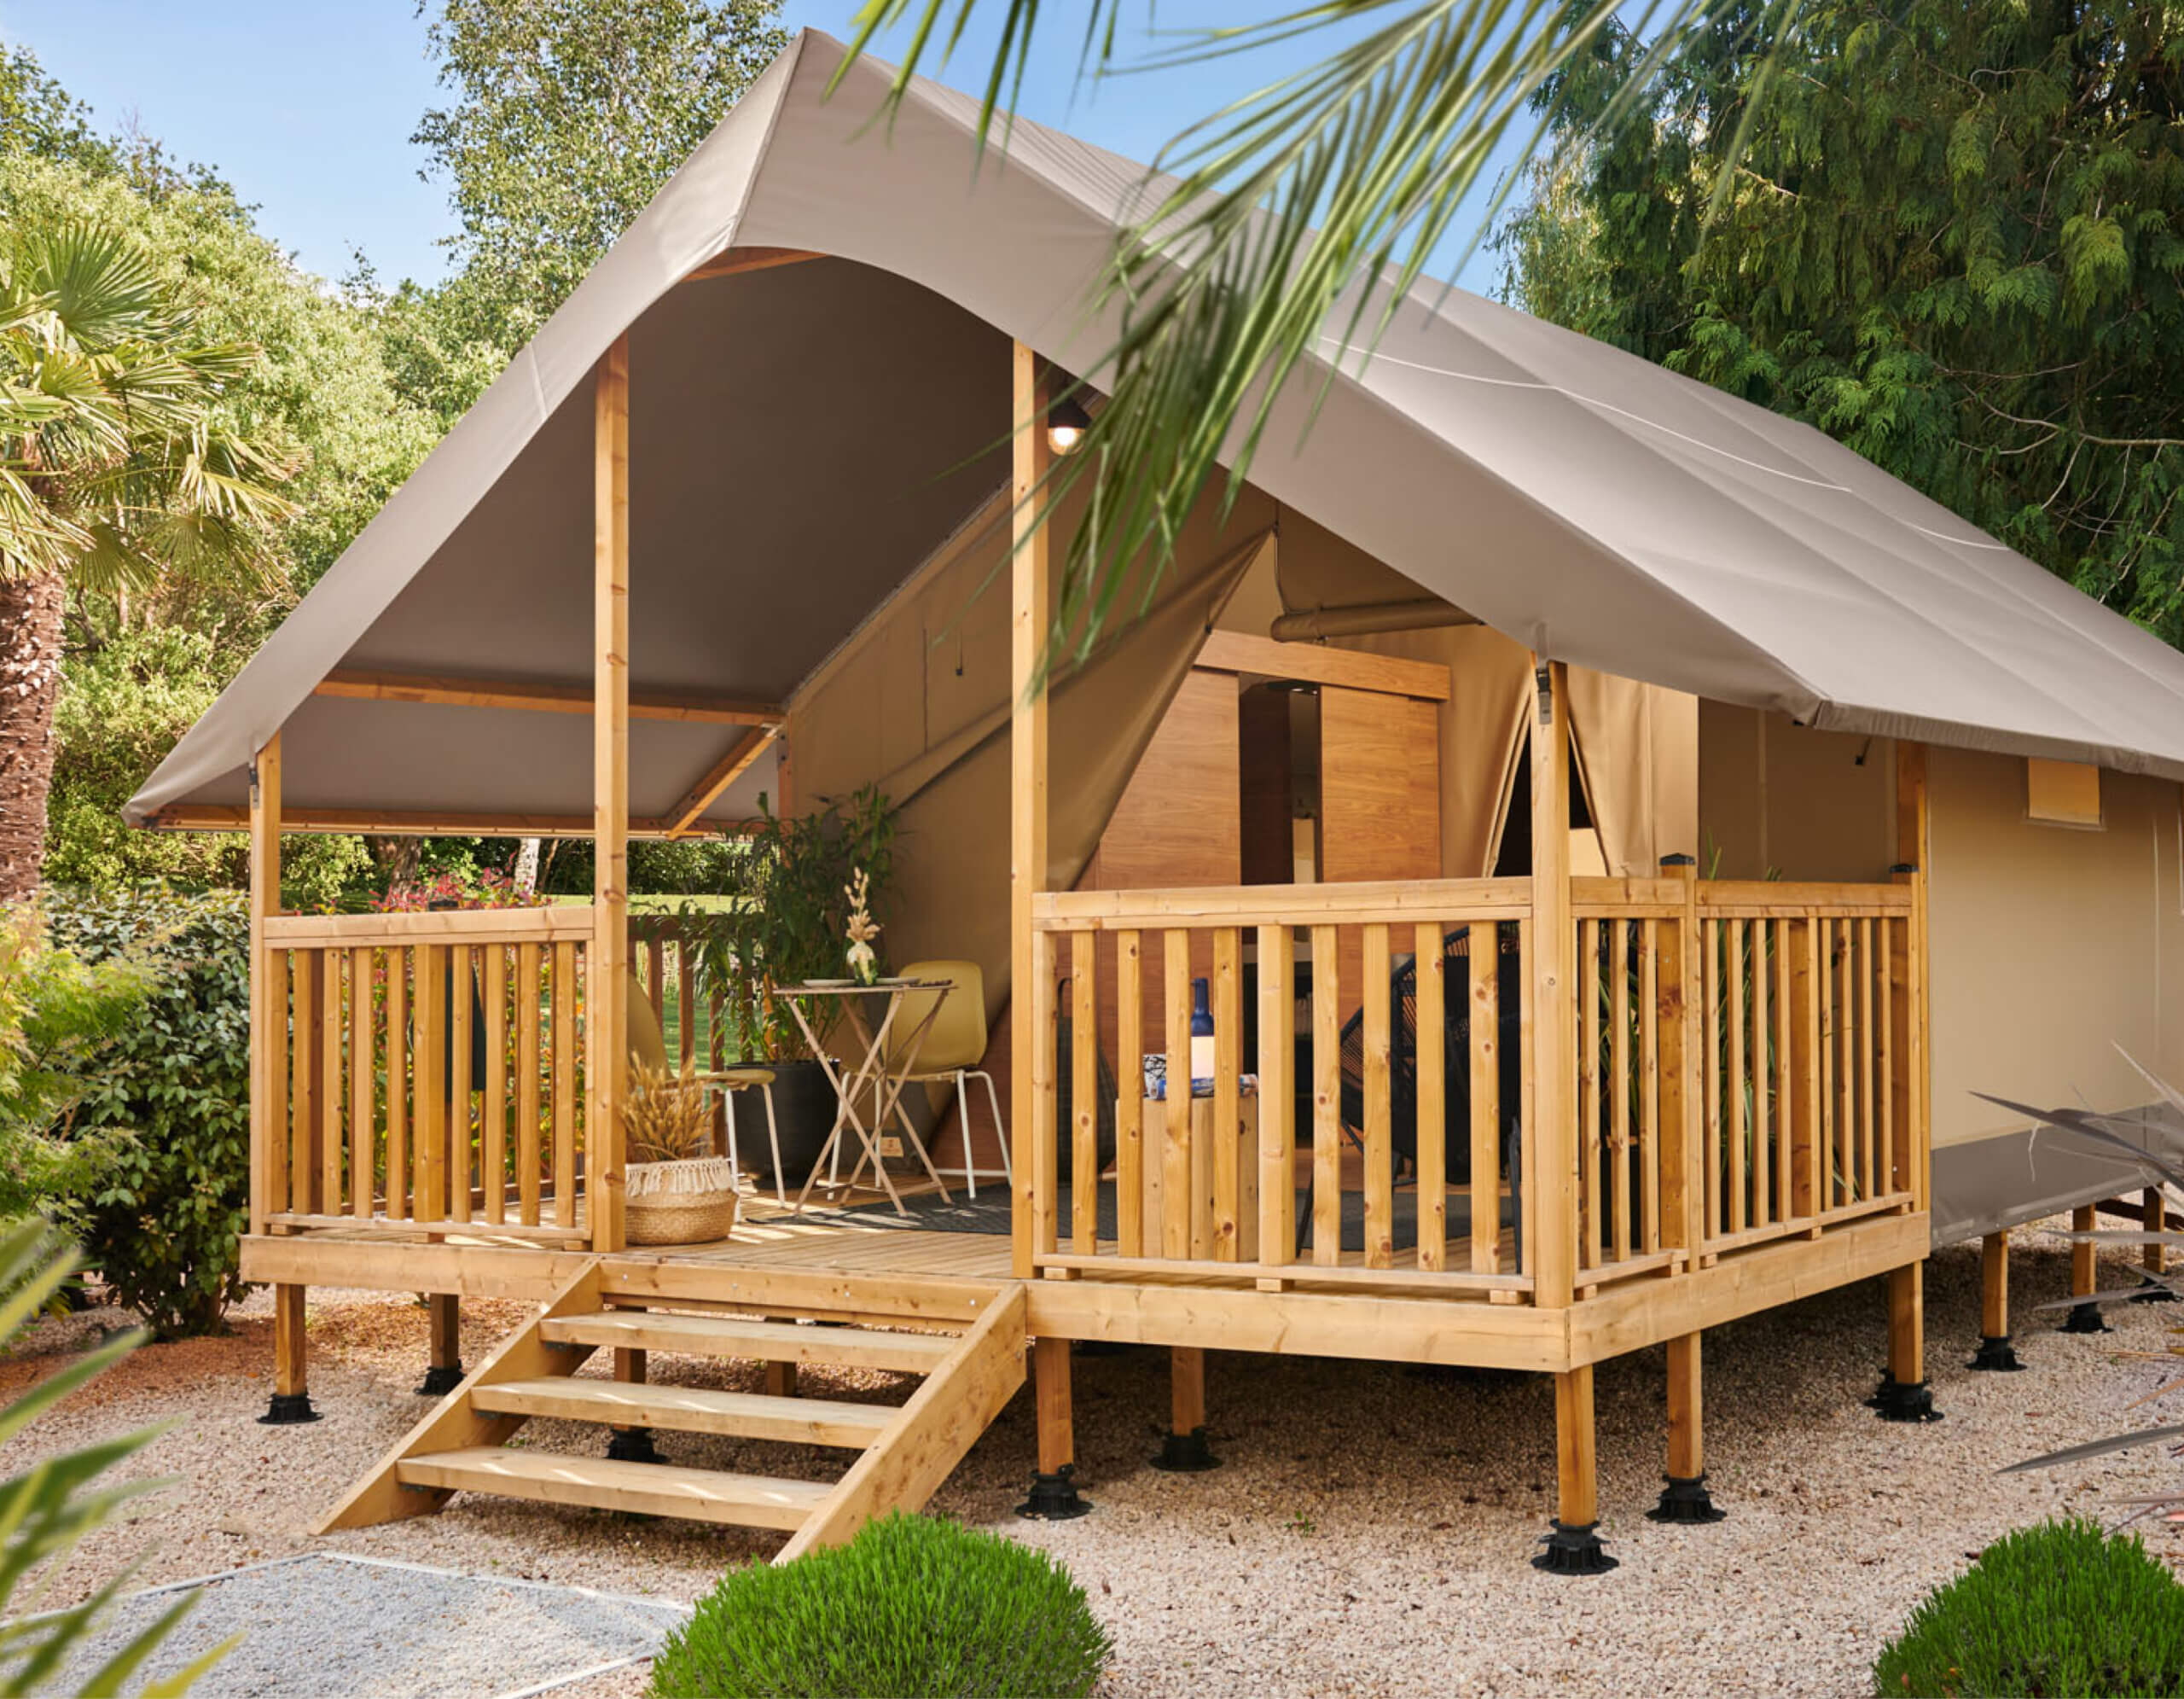 Location - Lodge 2 Chambres - Camping du Vieux Moulin